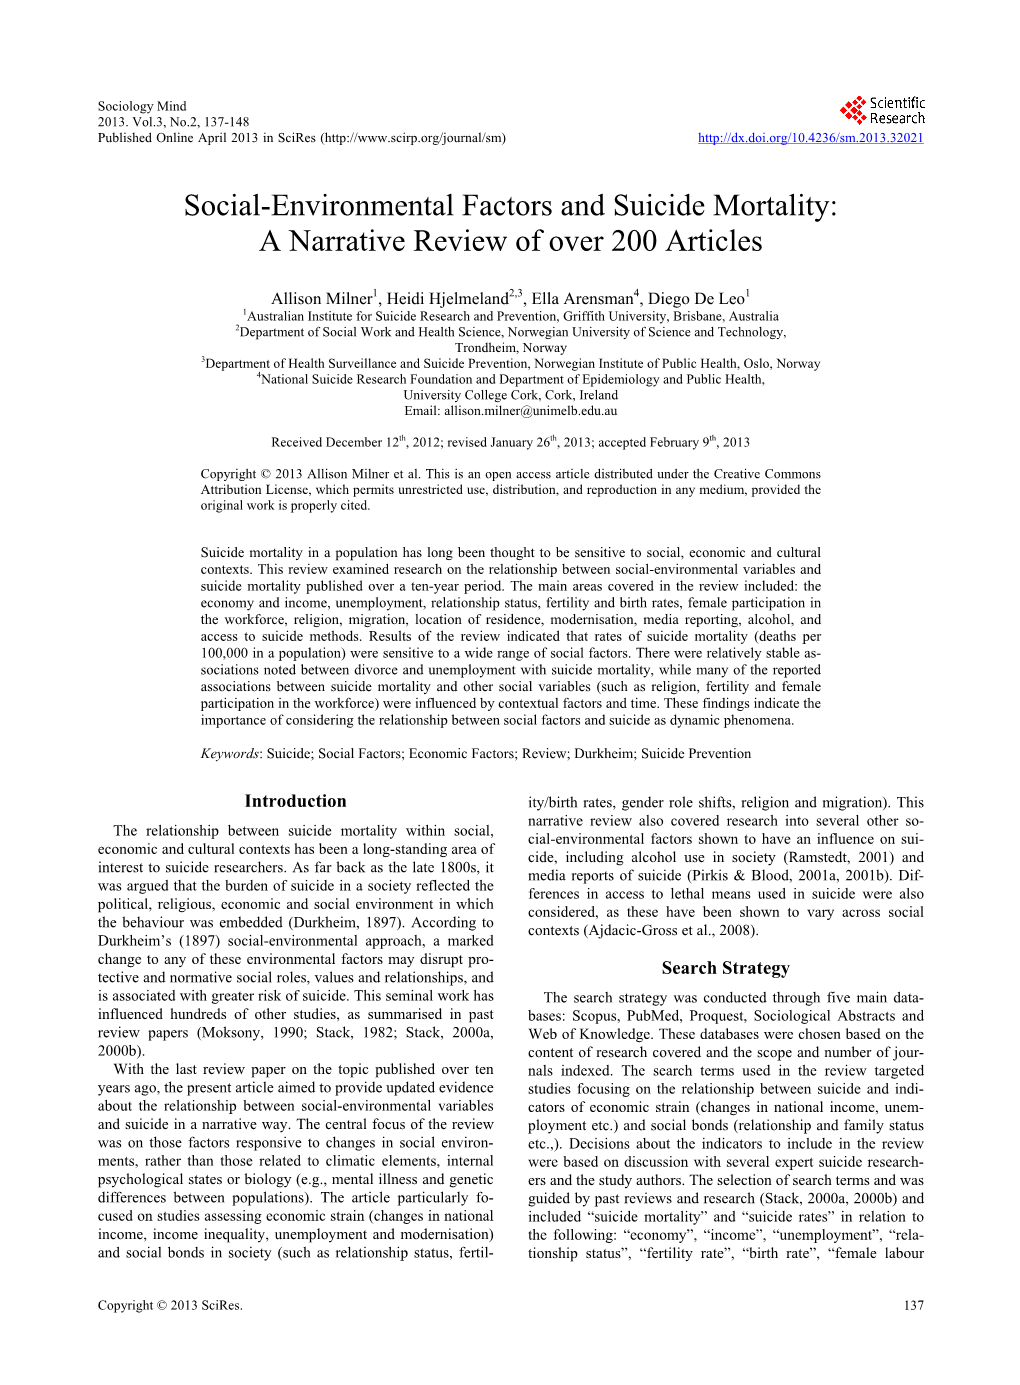 Social-Environmental Factors and Suicide Mortality: a Narrative Review of Over 200 Articles